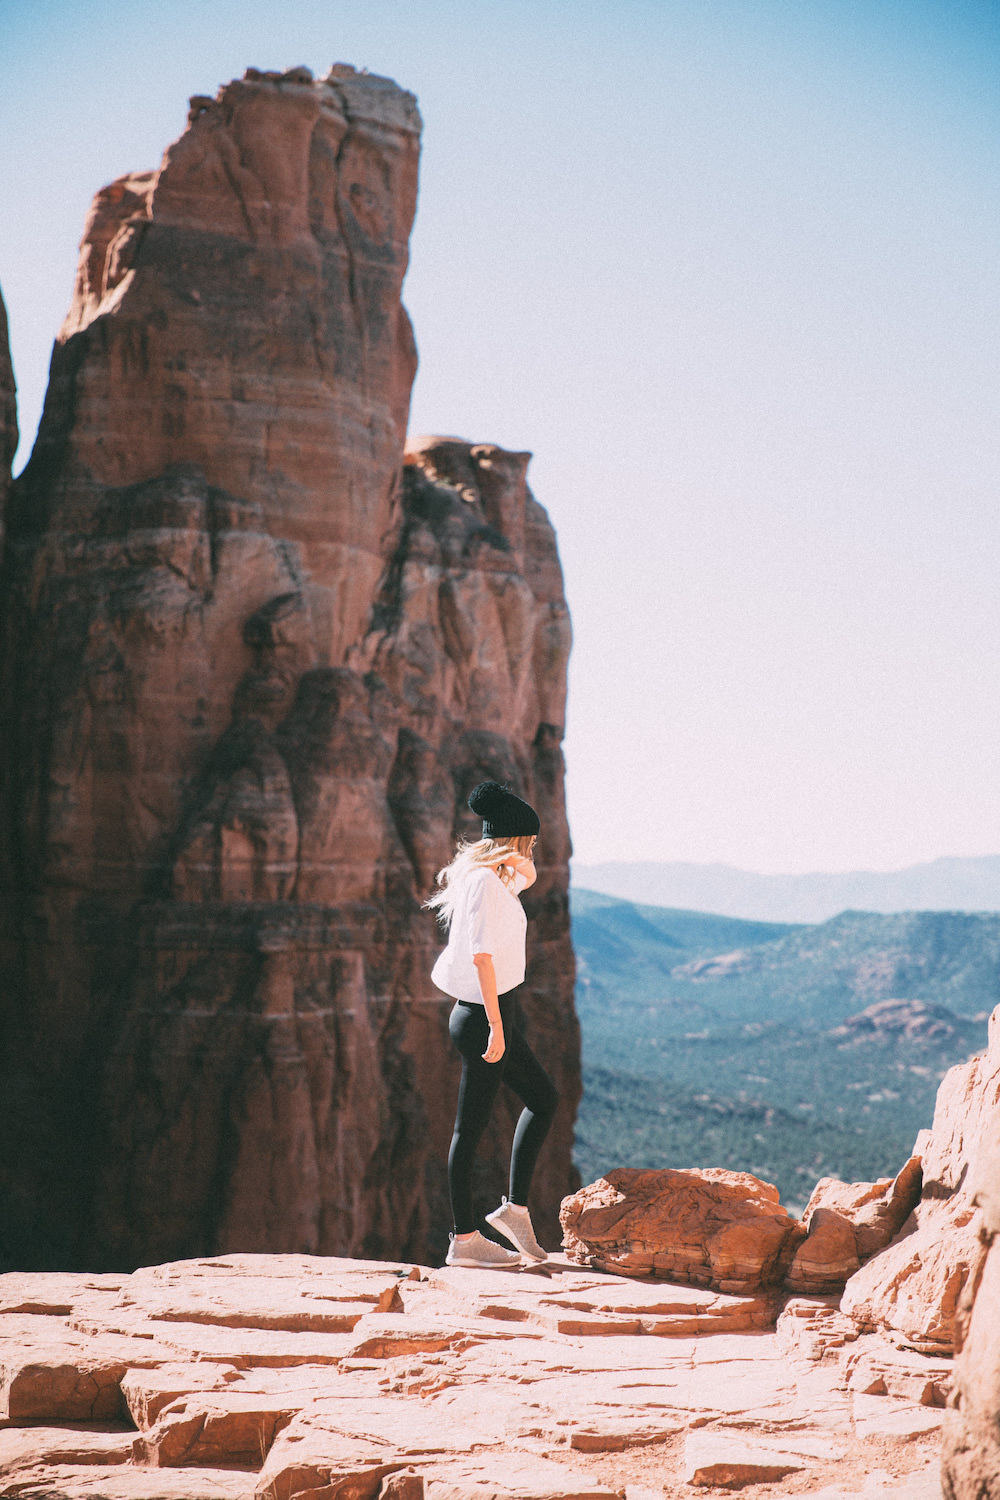 dash of darling shares her adventures hiking cathedral rock in sedona, arizona